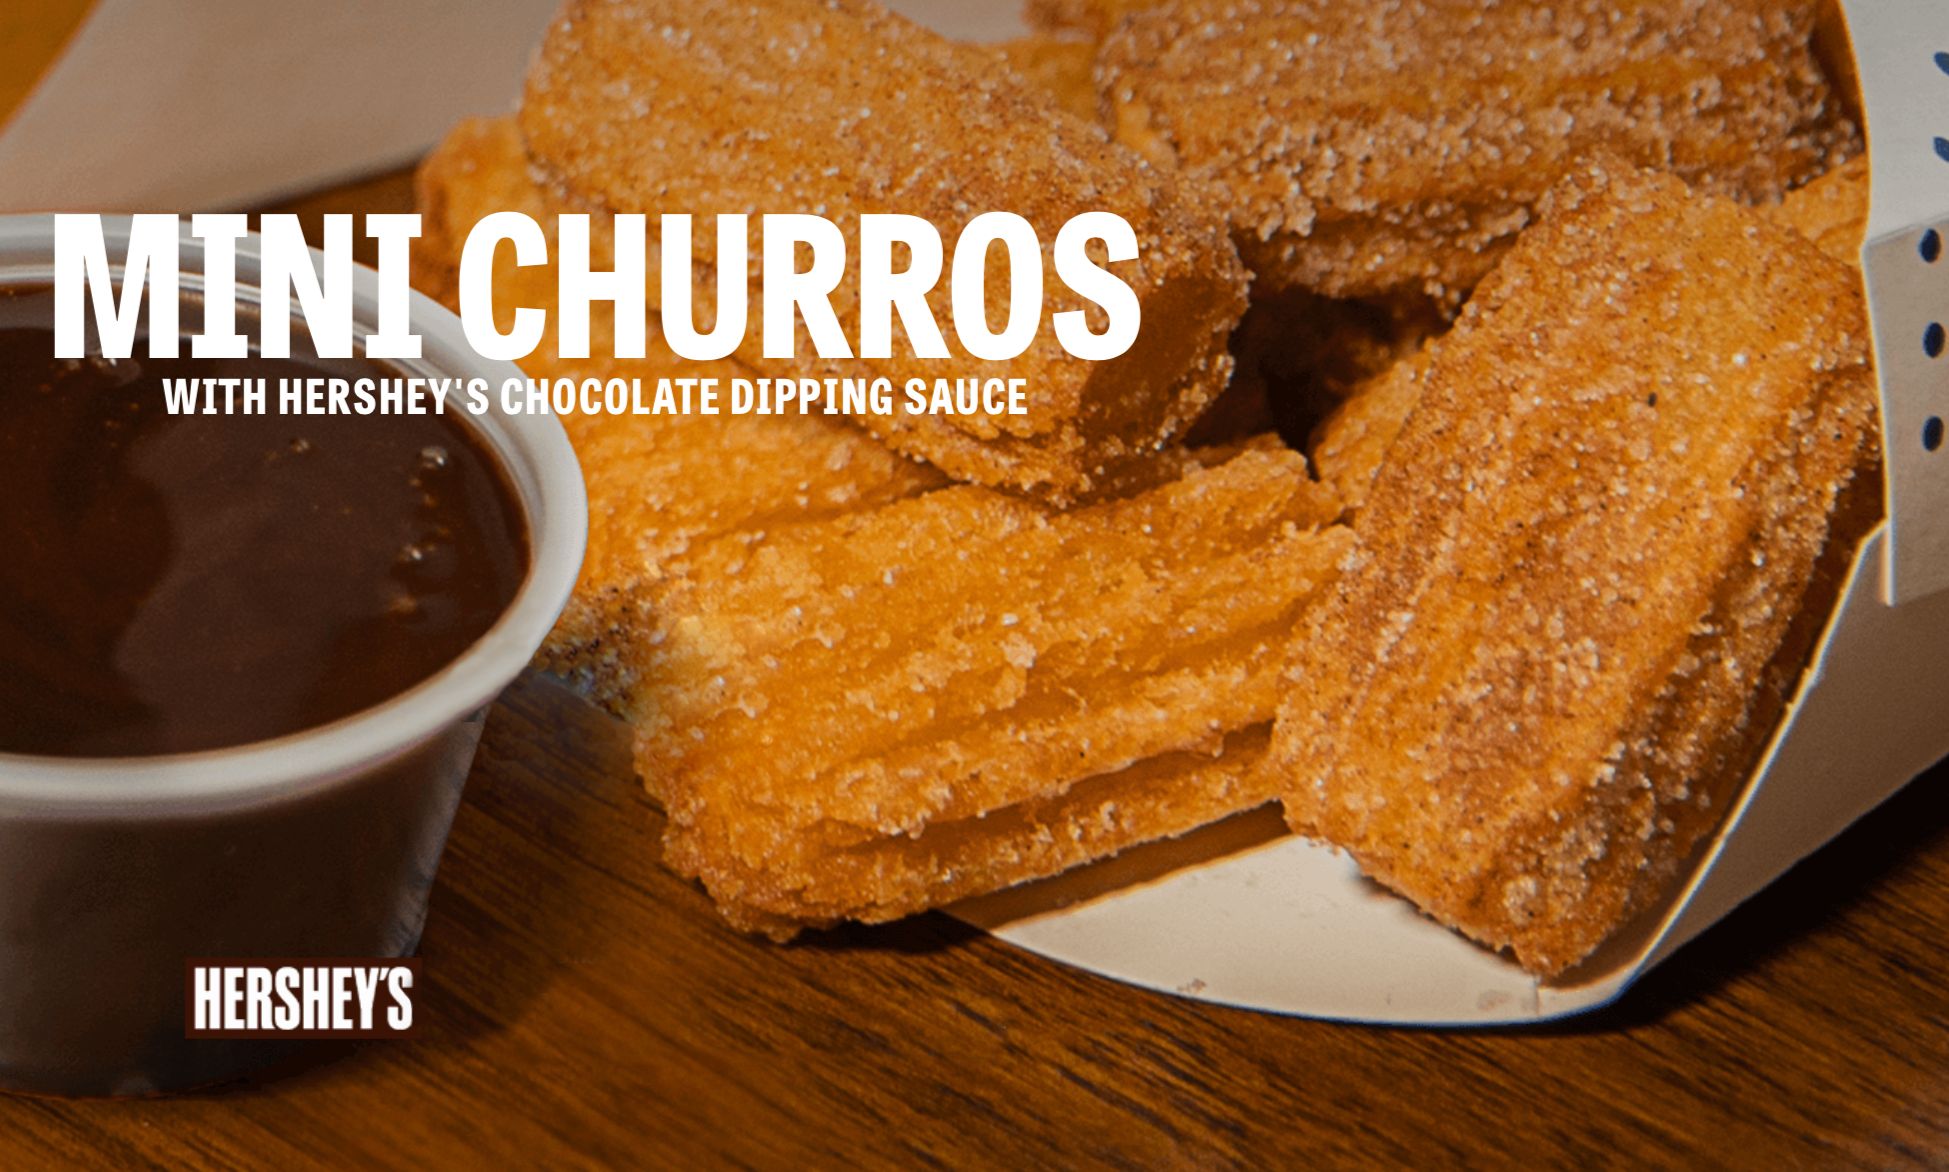 Church’s Chicken Launches New Mini Churros in Partnership with Hershey’s 